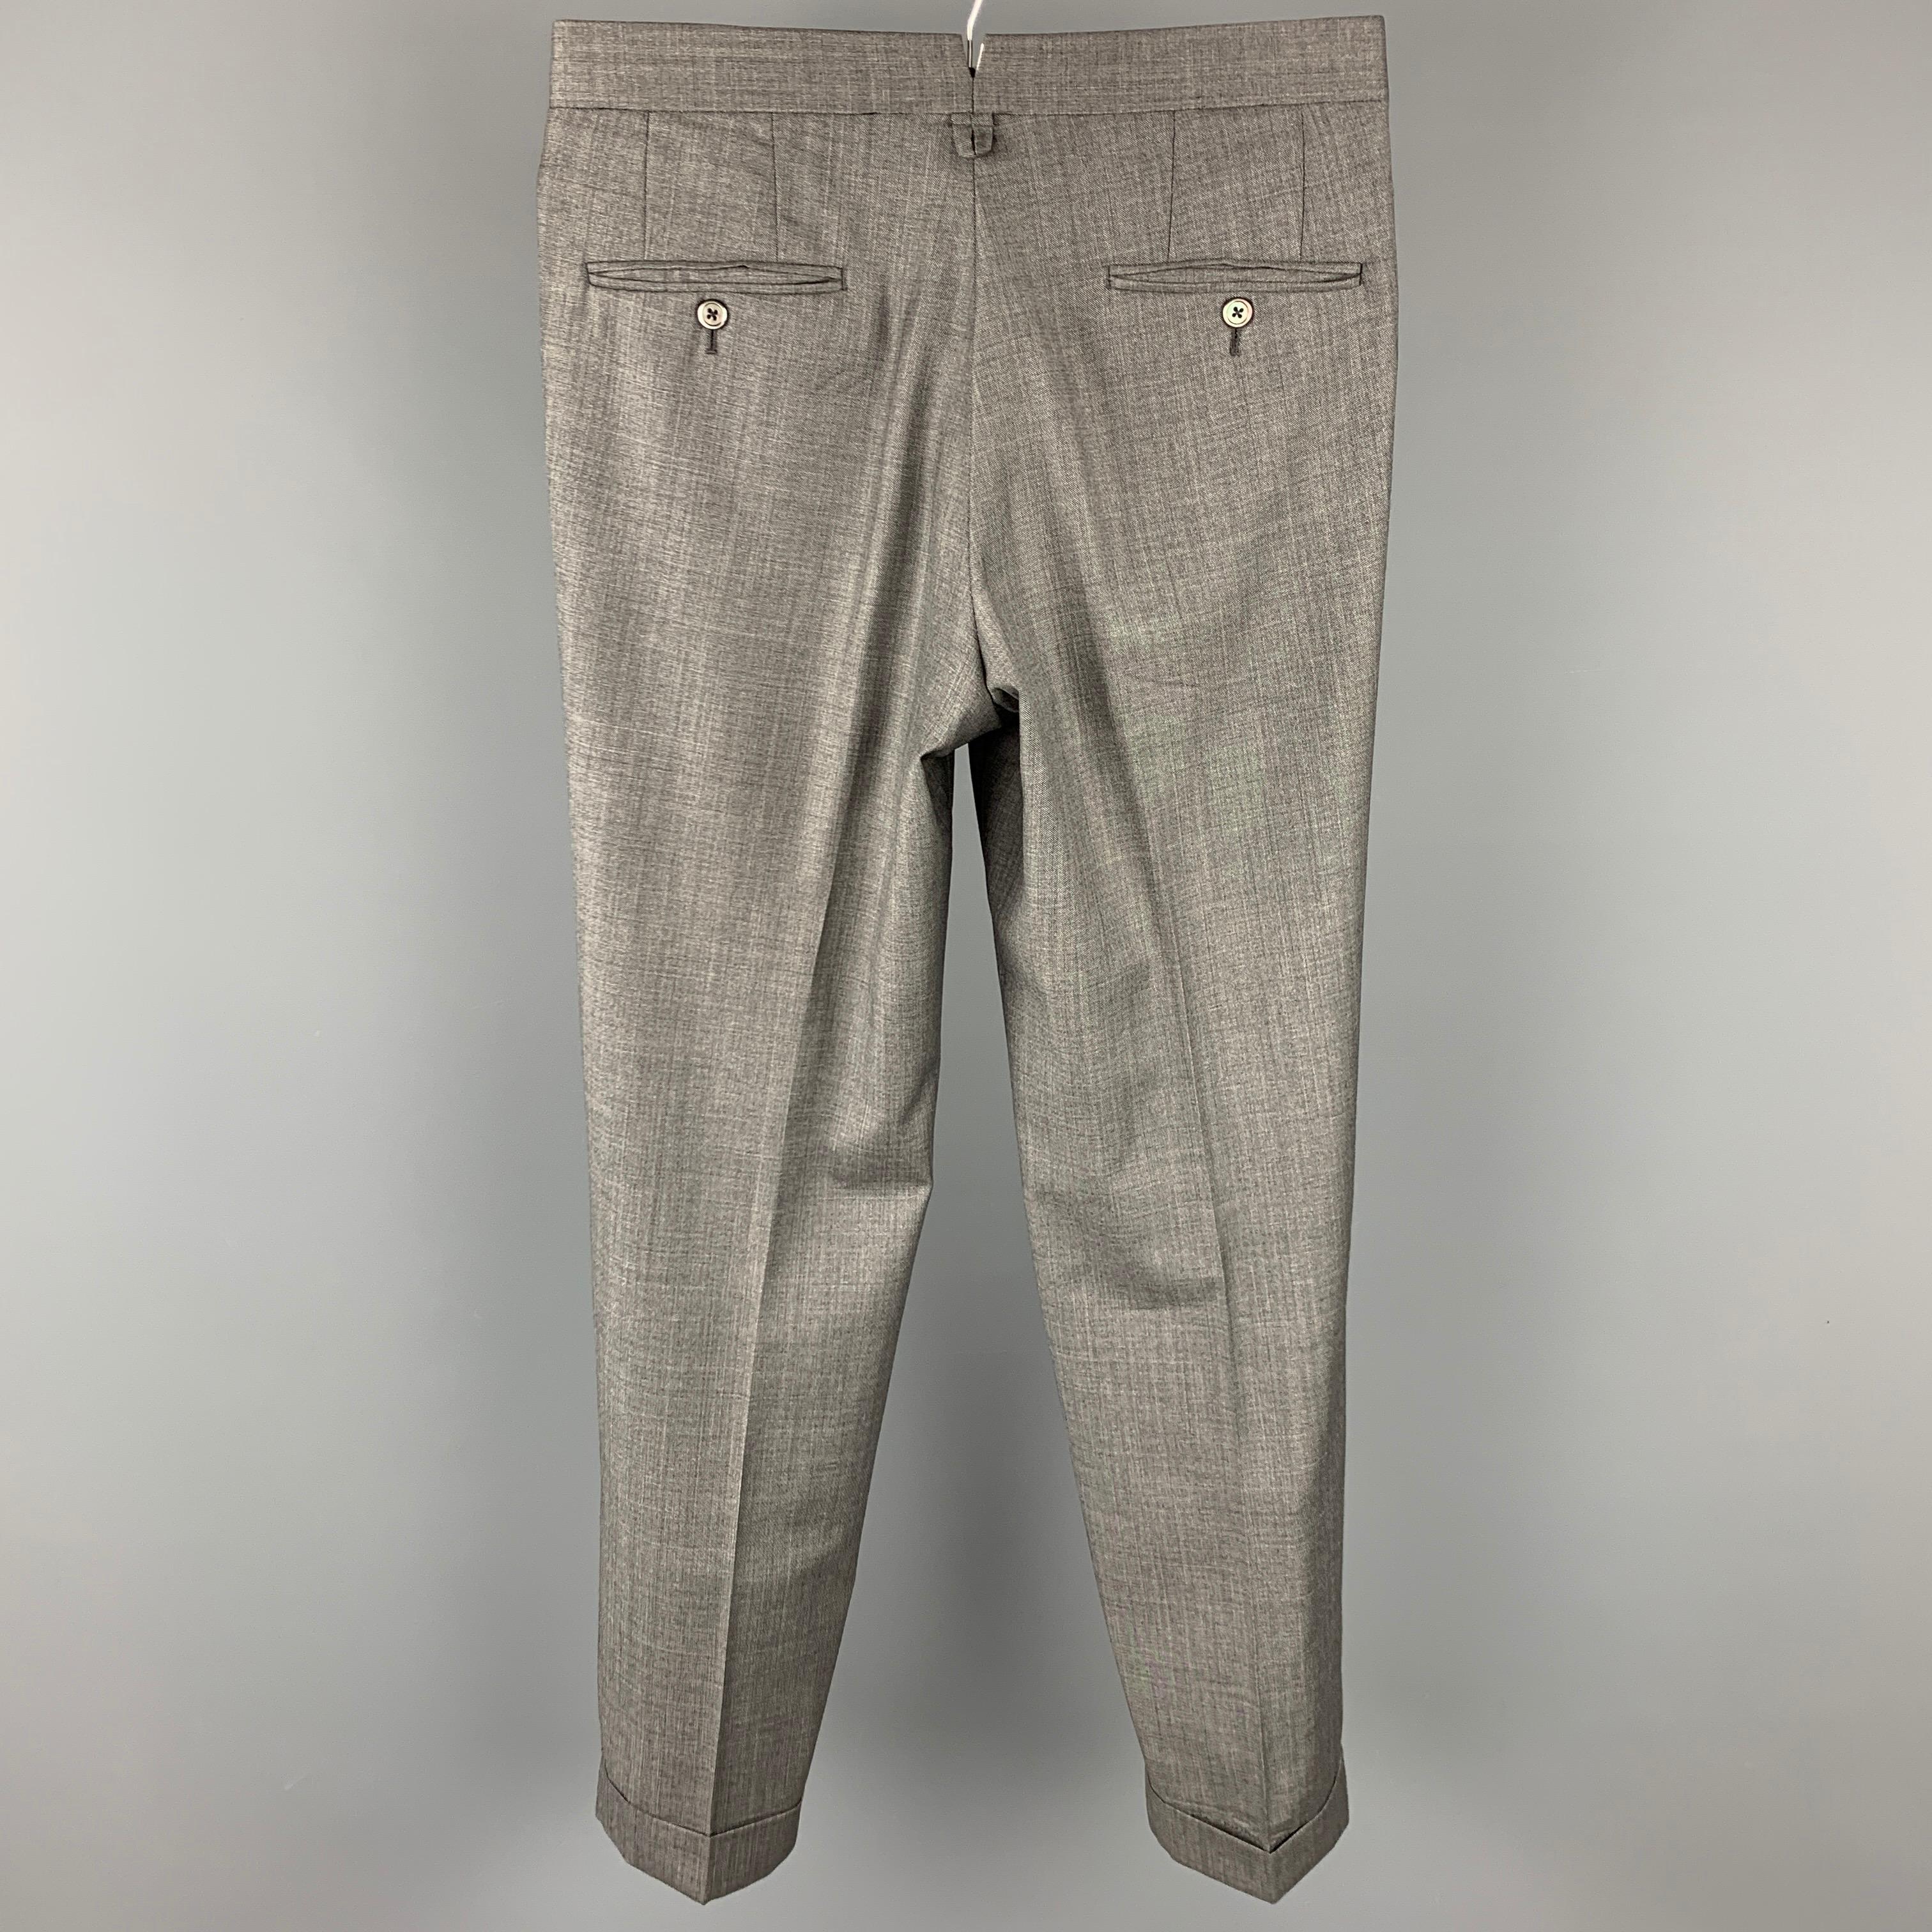 BLACK FLEECE dress pants comes in a grey heather wool featuring a flat front, front tab, and a zip fly closure. Made in USA.

Very Good Pre-Owned Condition.
Marked: BB1

Measurements:

Waist: 32 in.
Rise: 11 in.
Inseam: 32 in. 